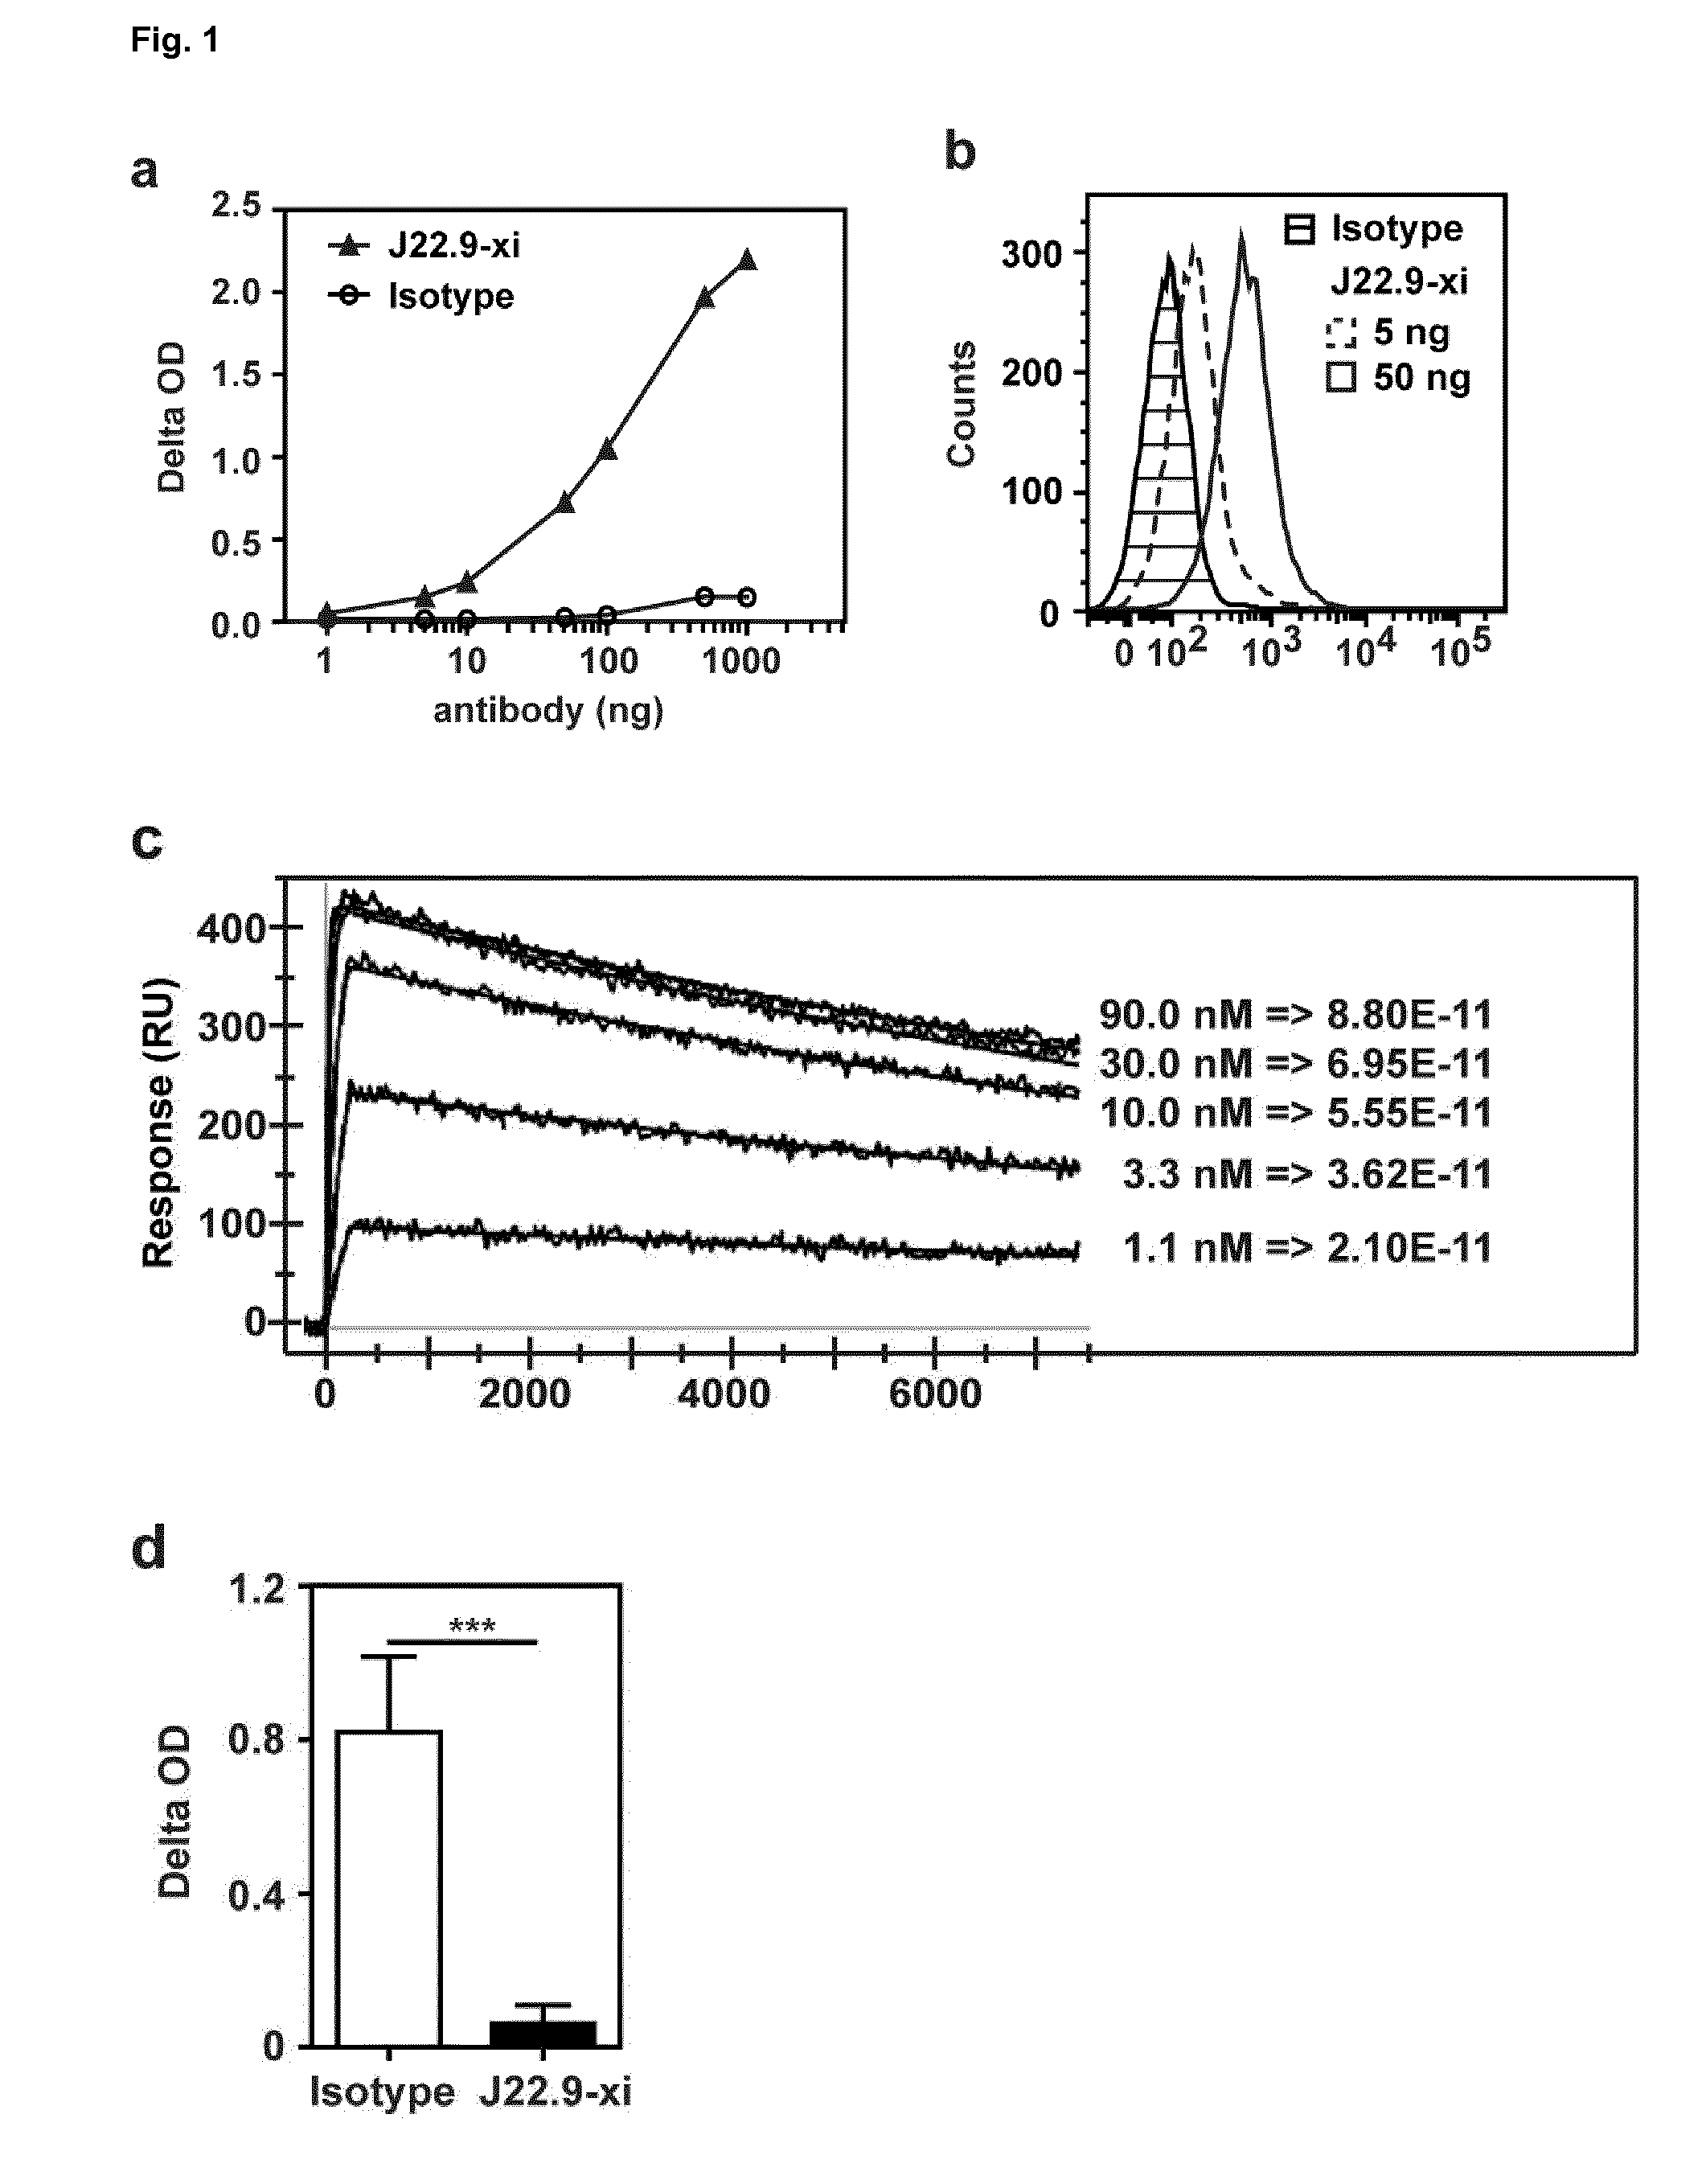 Antibody that binds cd269 (BCMA) suitable for use in the treatment of plasma cell diseases such as multiple myeloma and autoimmune diseases